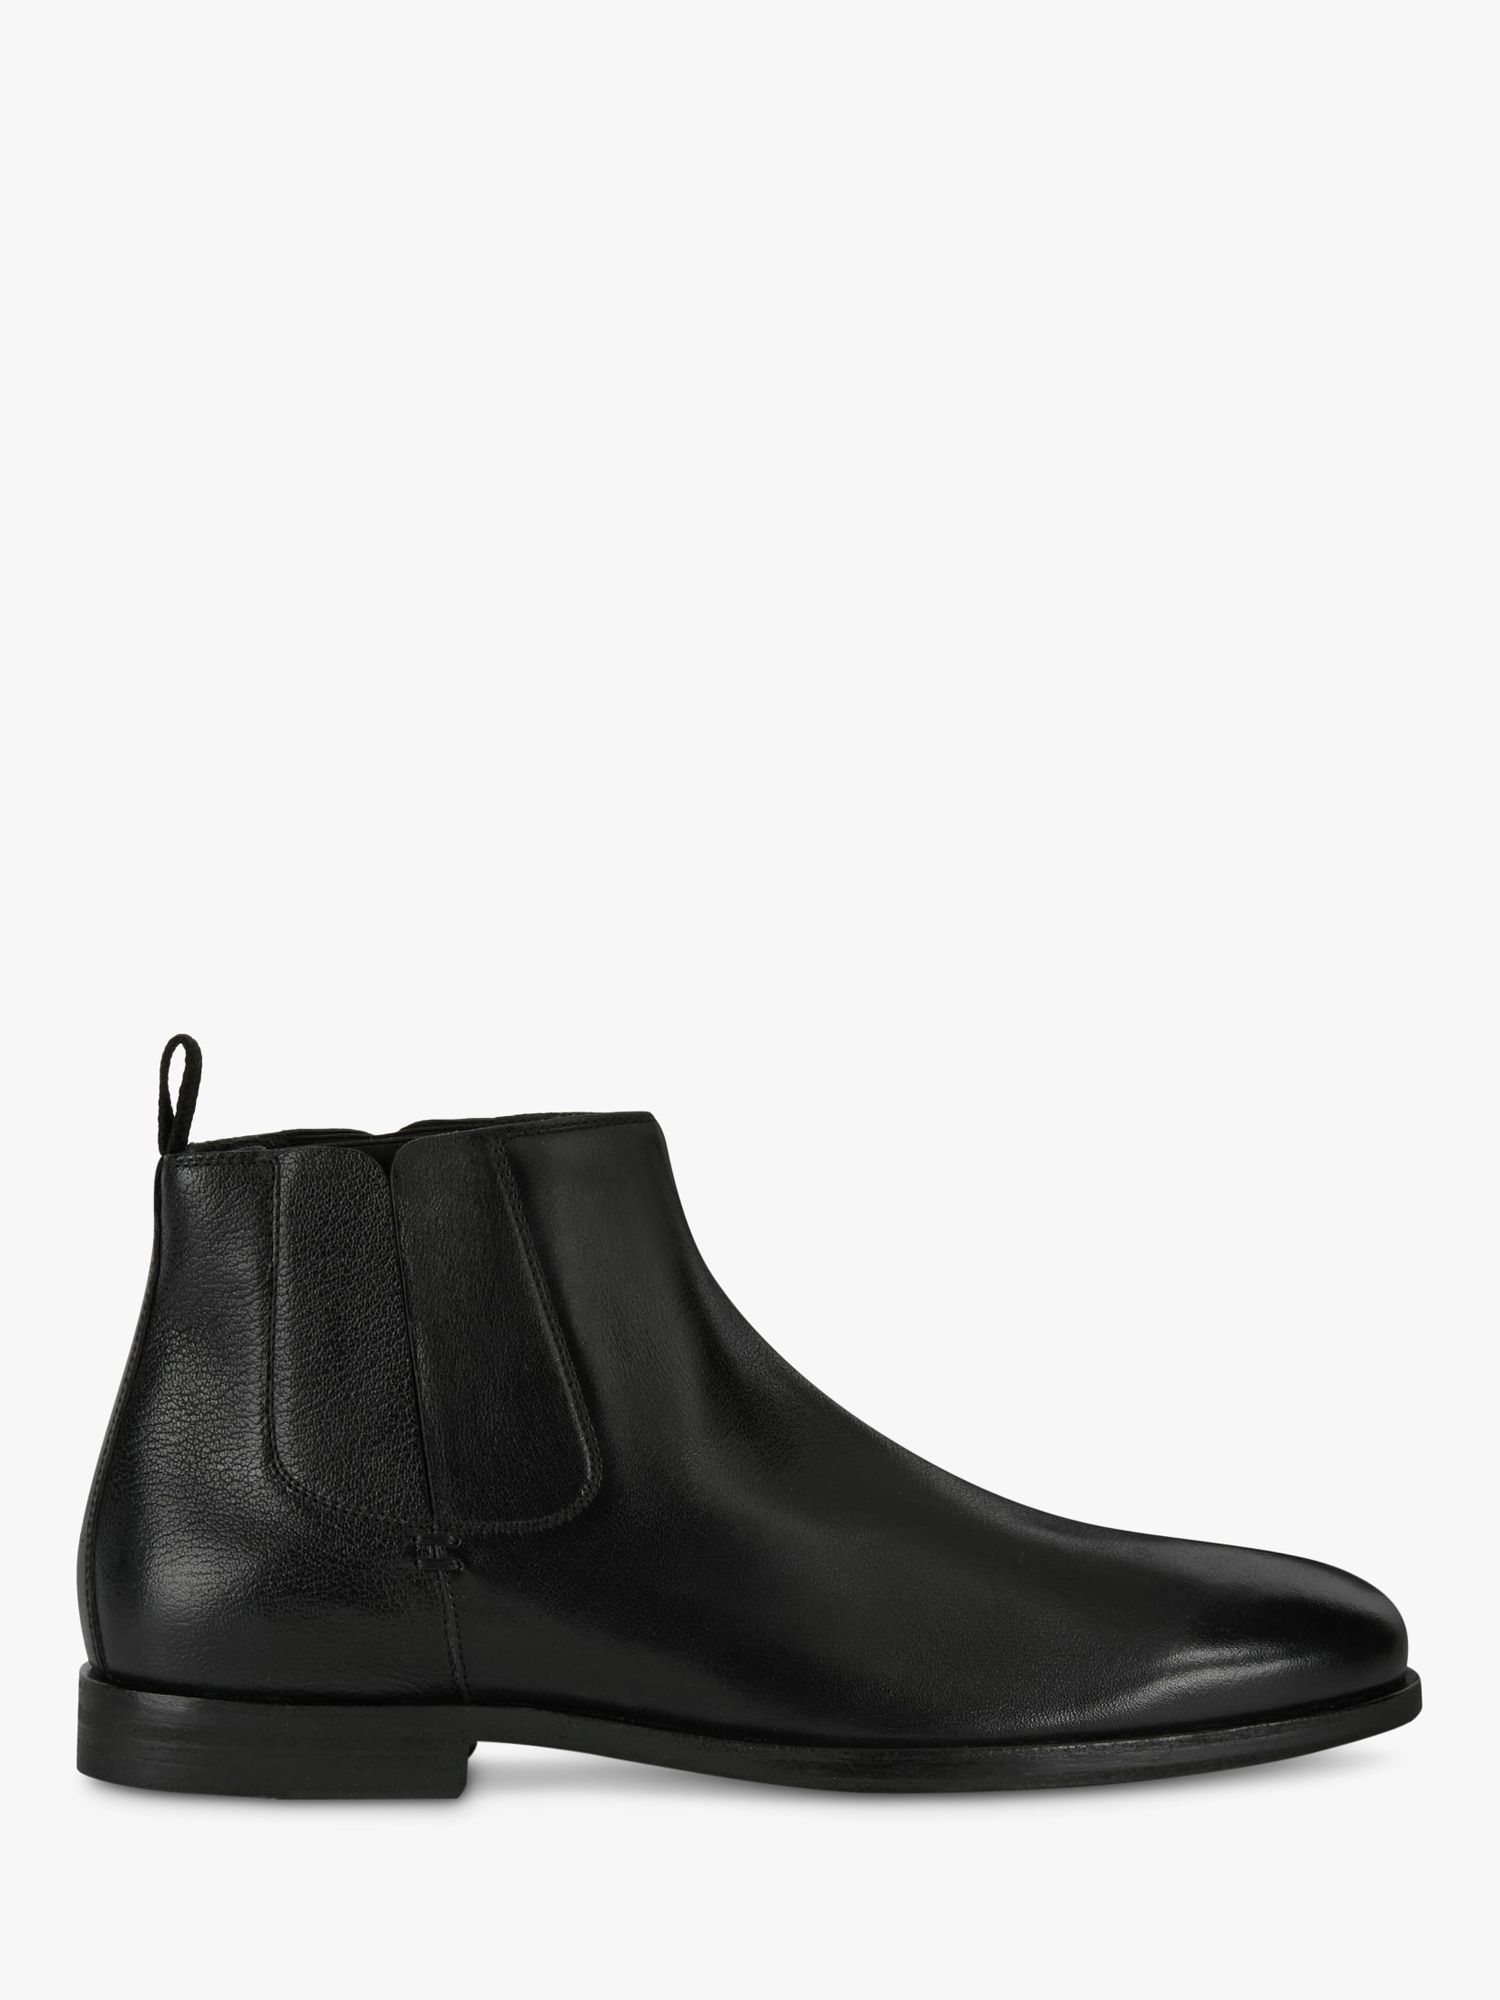 Geox Bayle Leather Chelsea Boots, Black